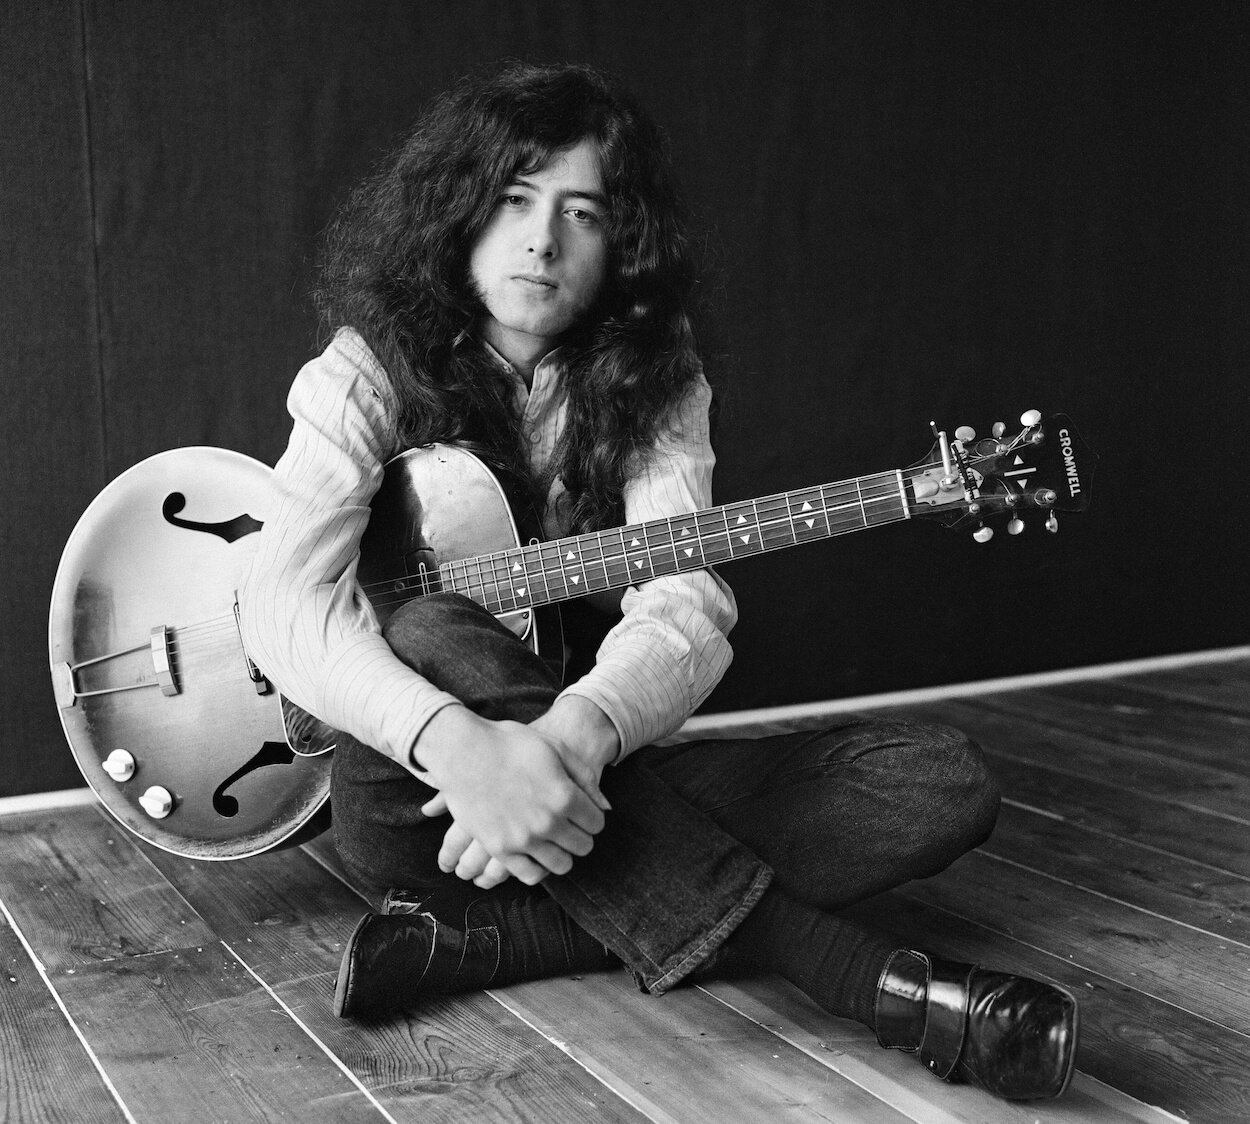 Jimmy Page cradling a guitar and sitting on a wooden floor in his house.